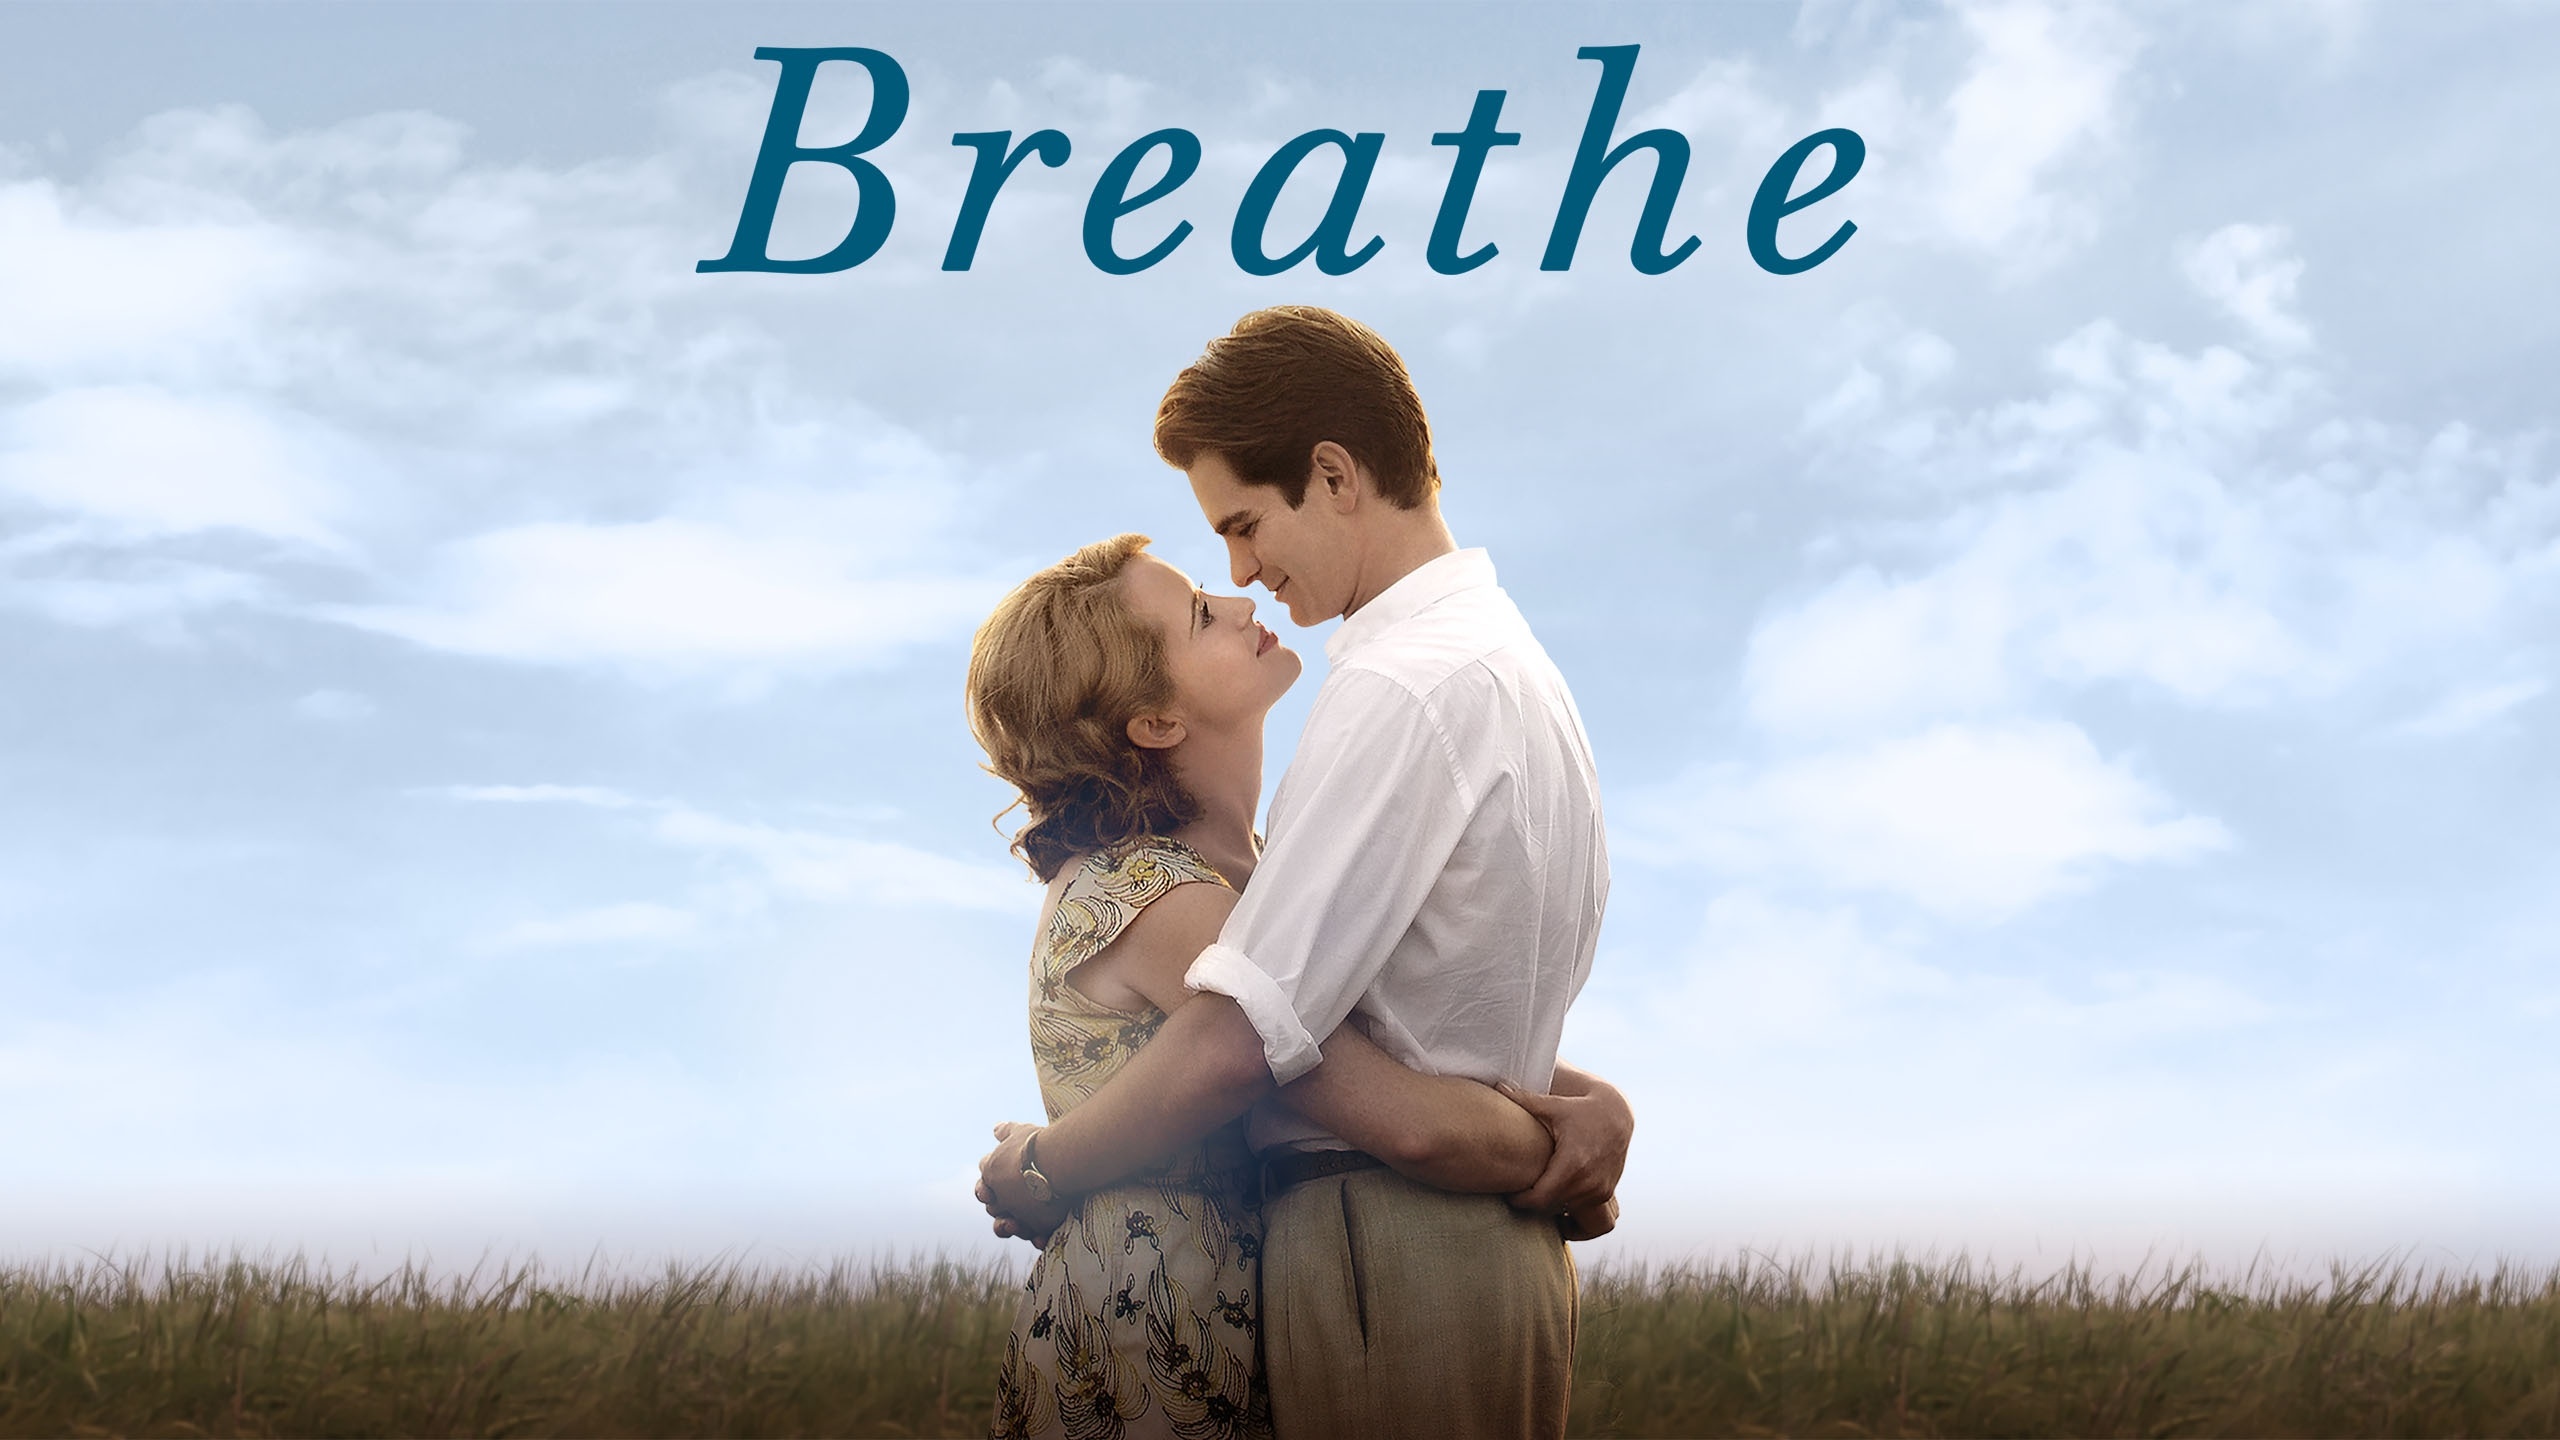 Breathe movie, Watch online free, Roku channel trial, Entertainment at your fingertips, 2560x1440 HD Desktop